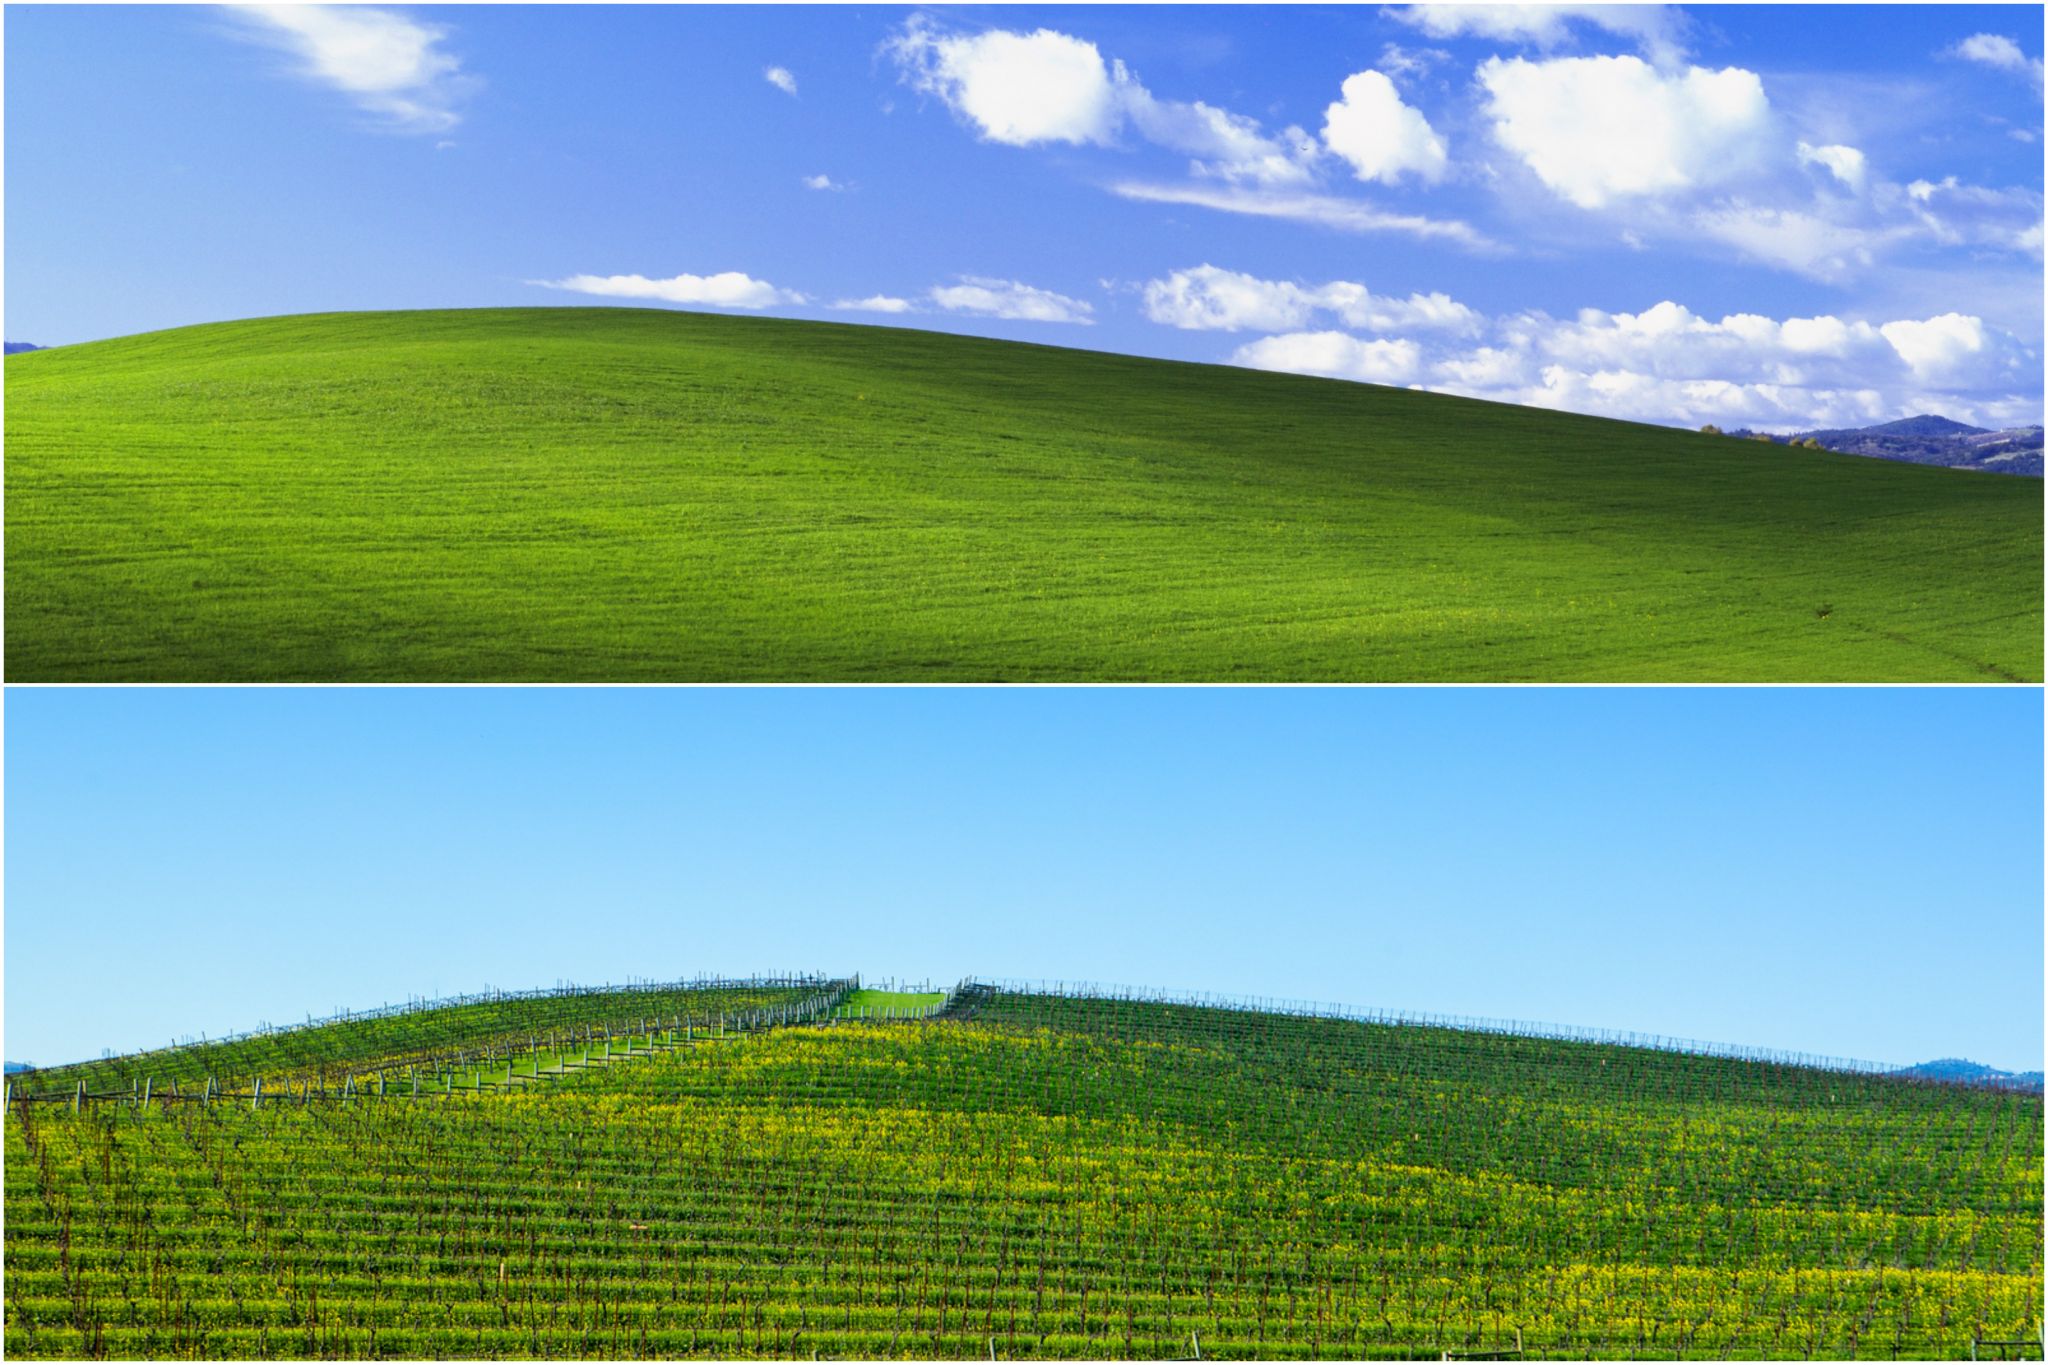 Download Windows XP Bliss - The Iconic Rolling Green Hills Wallpaper |  Wallpapers.com